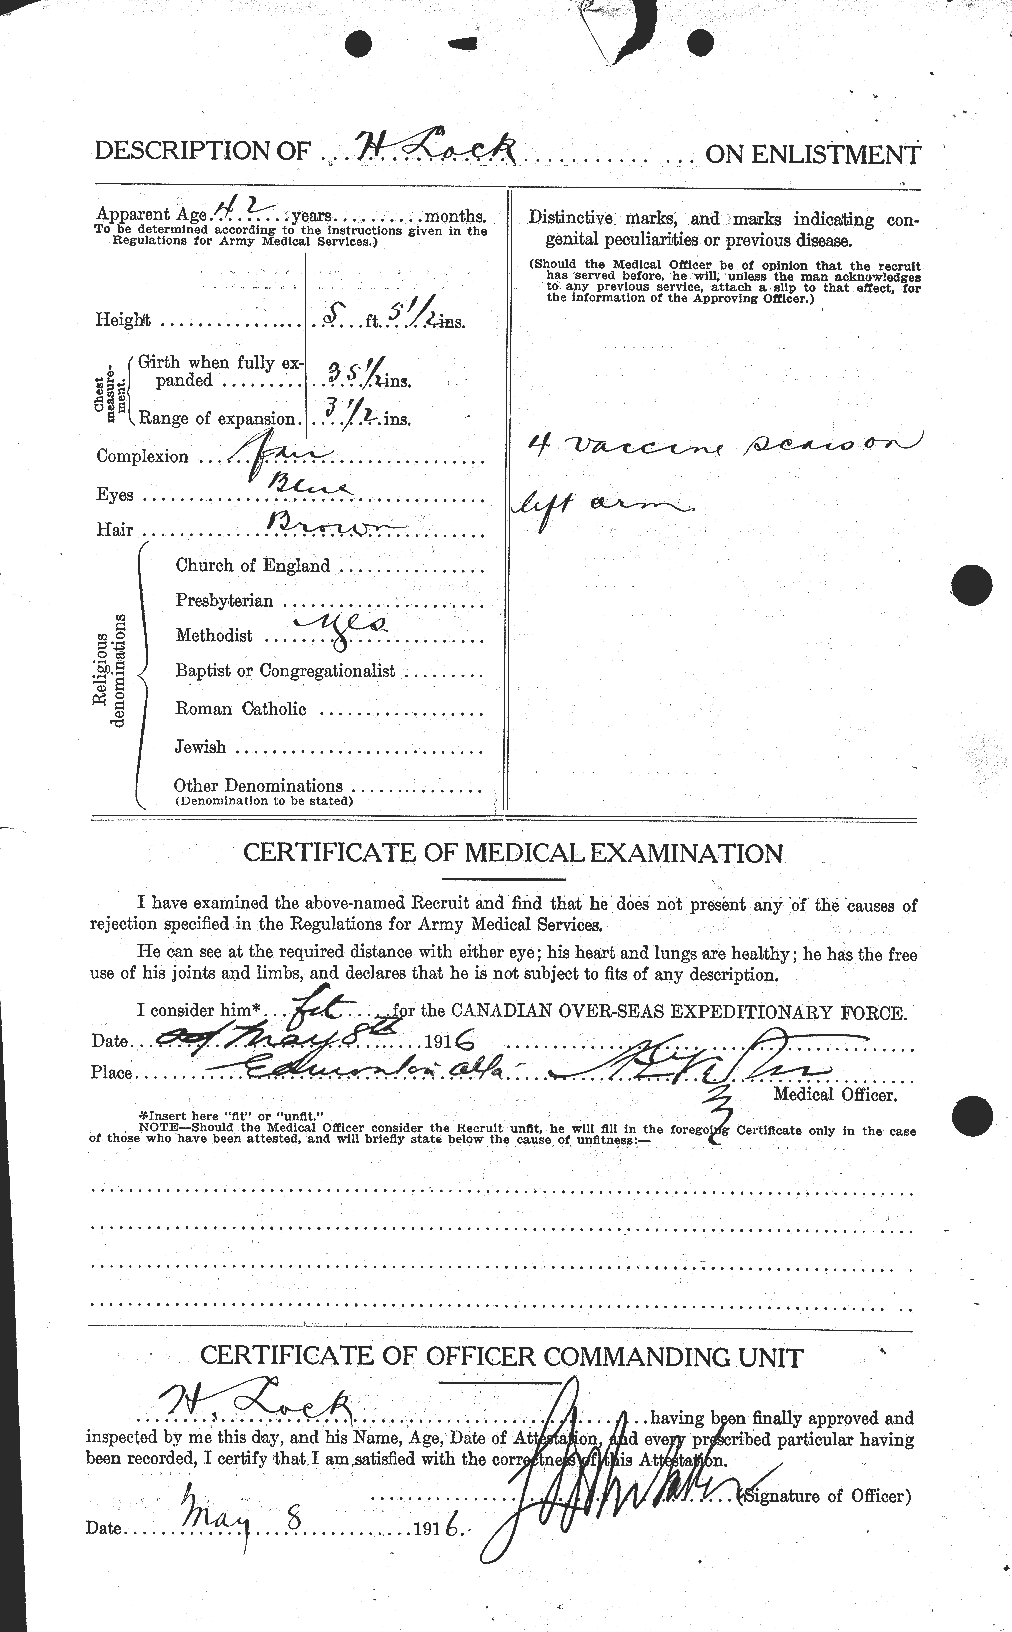 Personnel Records of the First World War - CEF 472207b